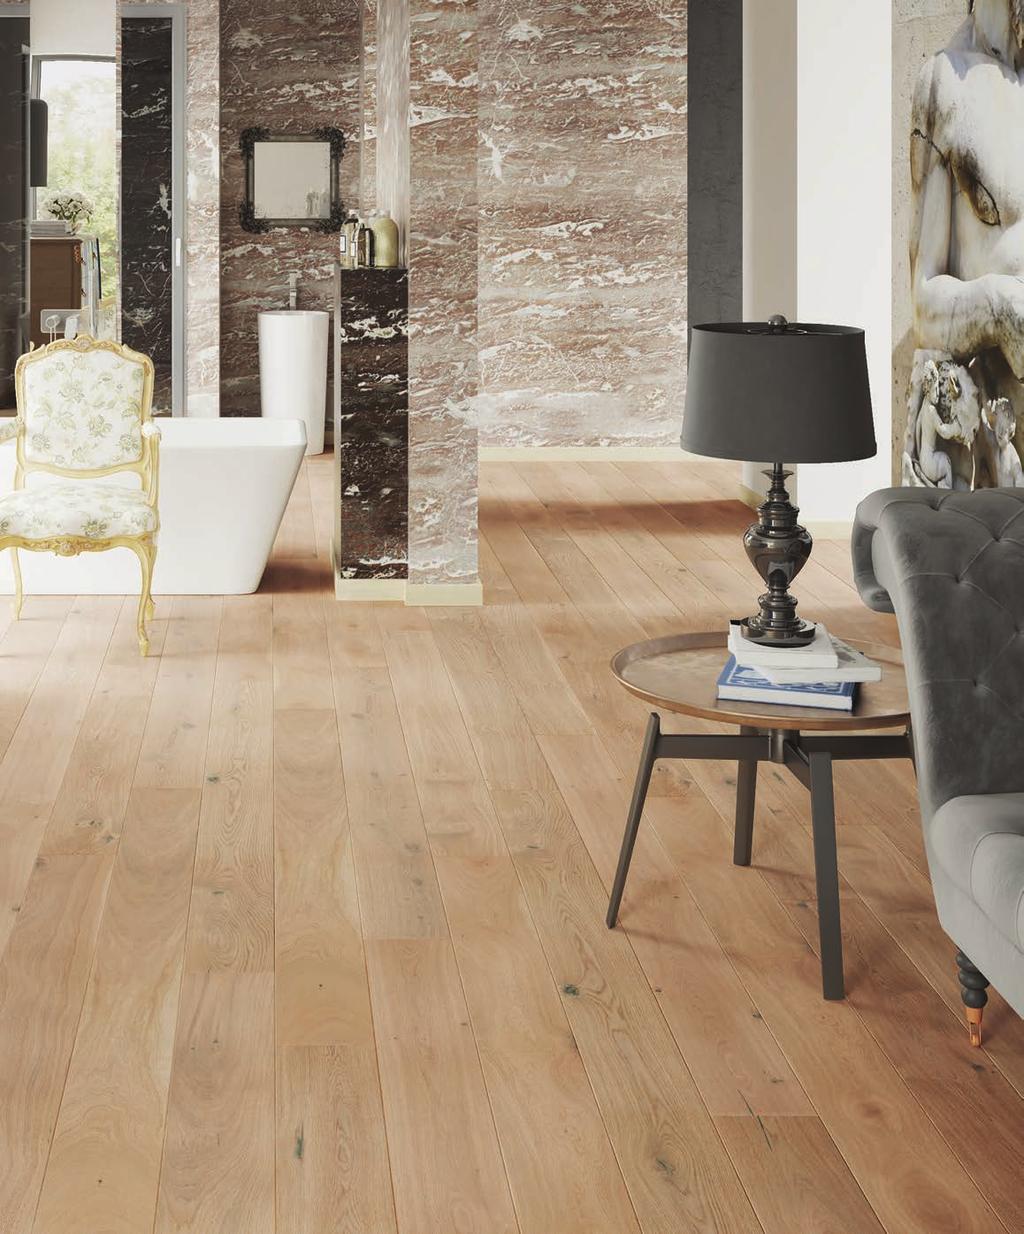 Isherwood Flooring Collection Made of